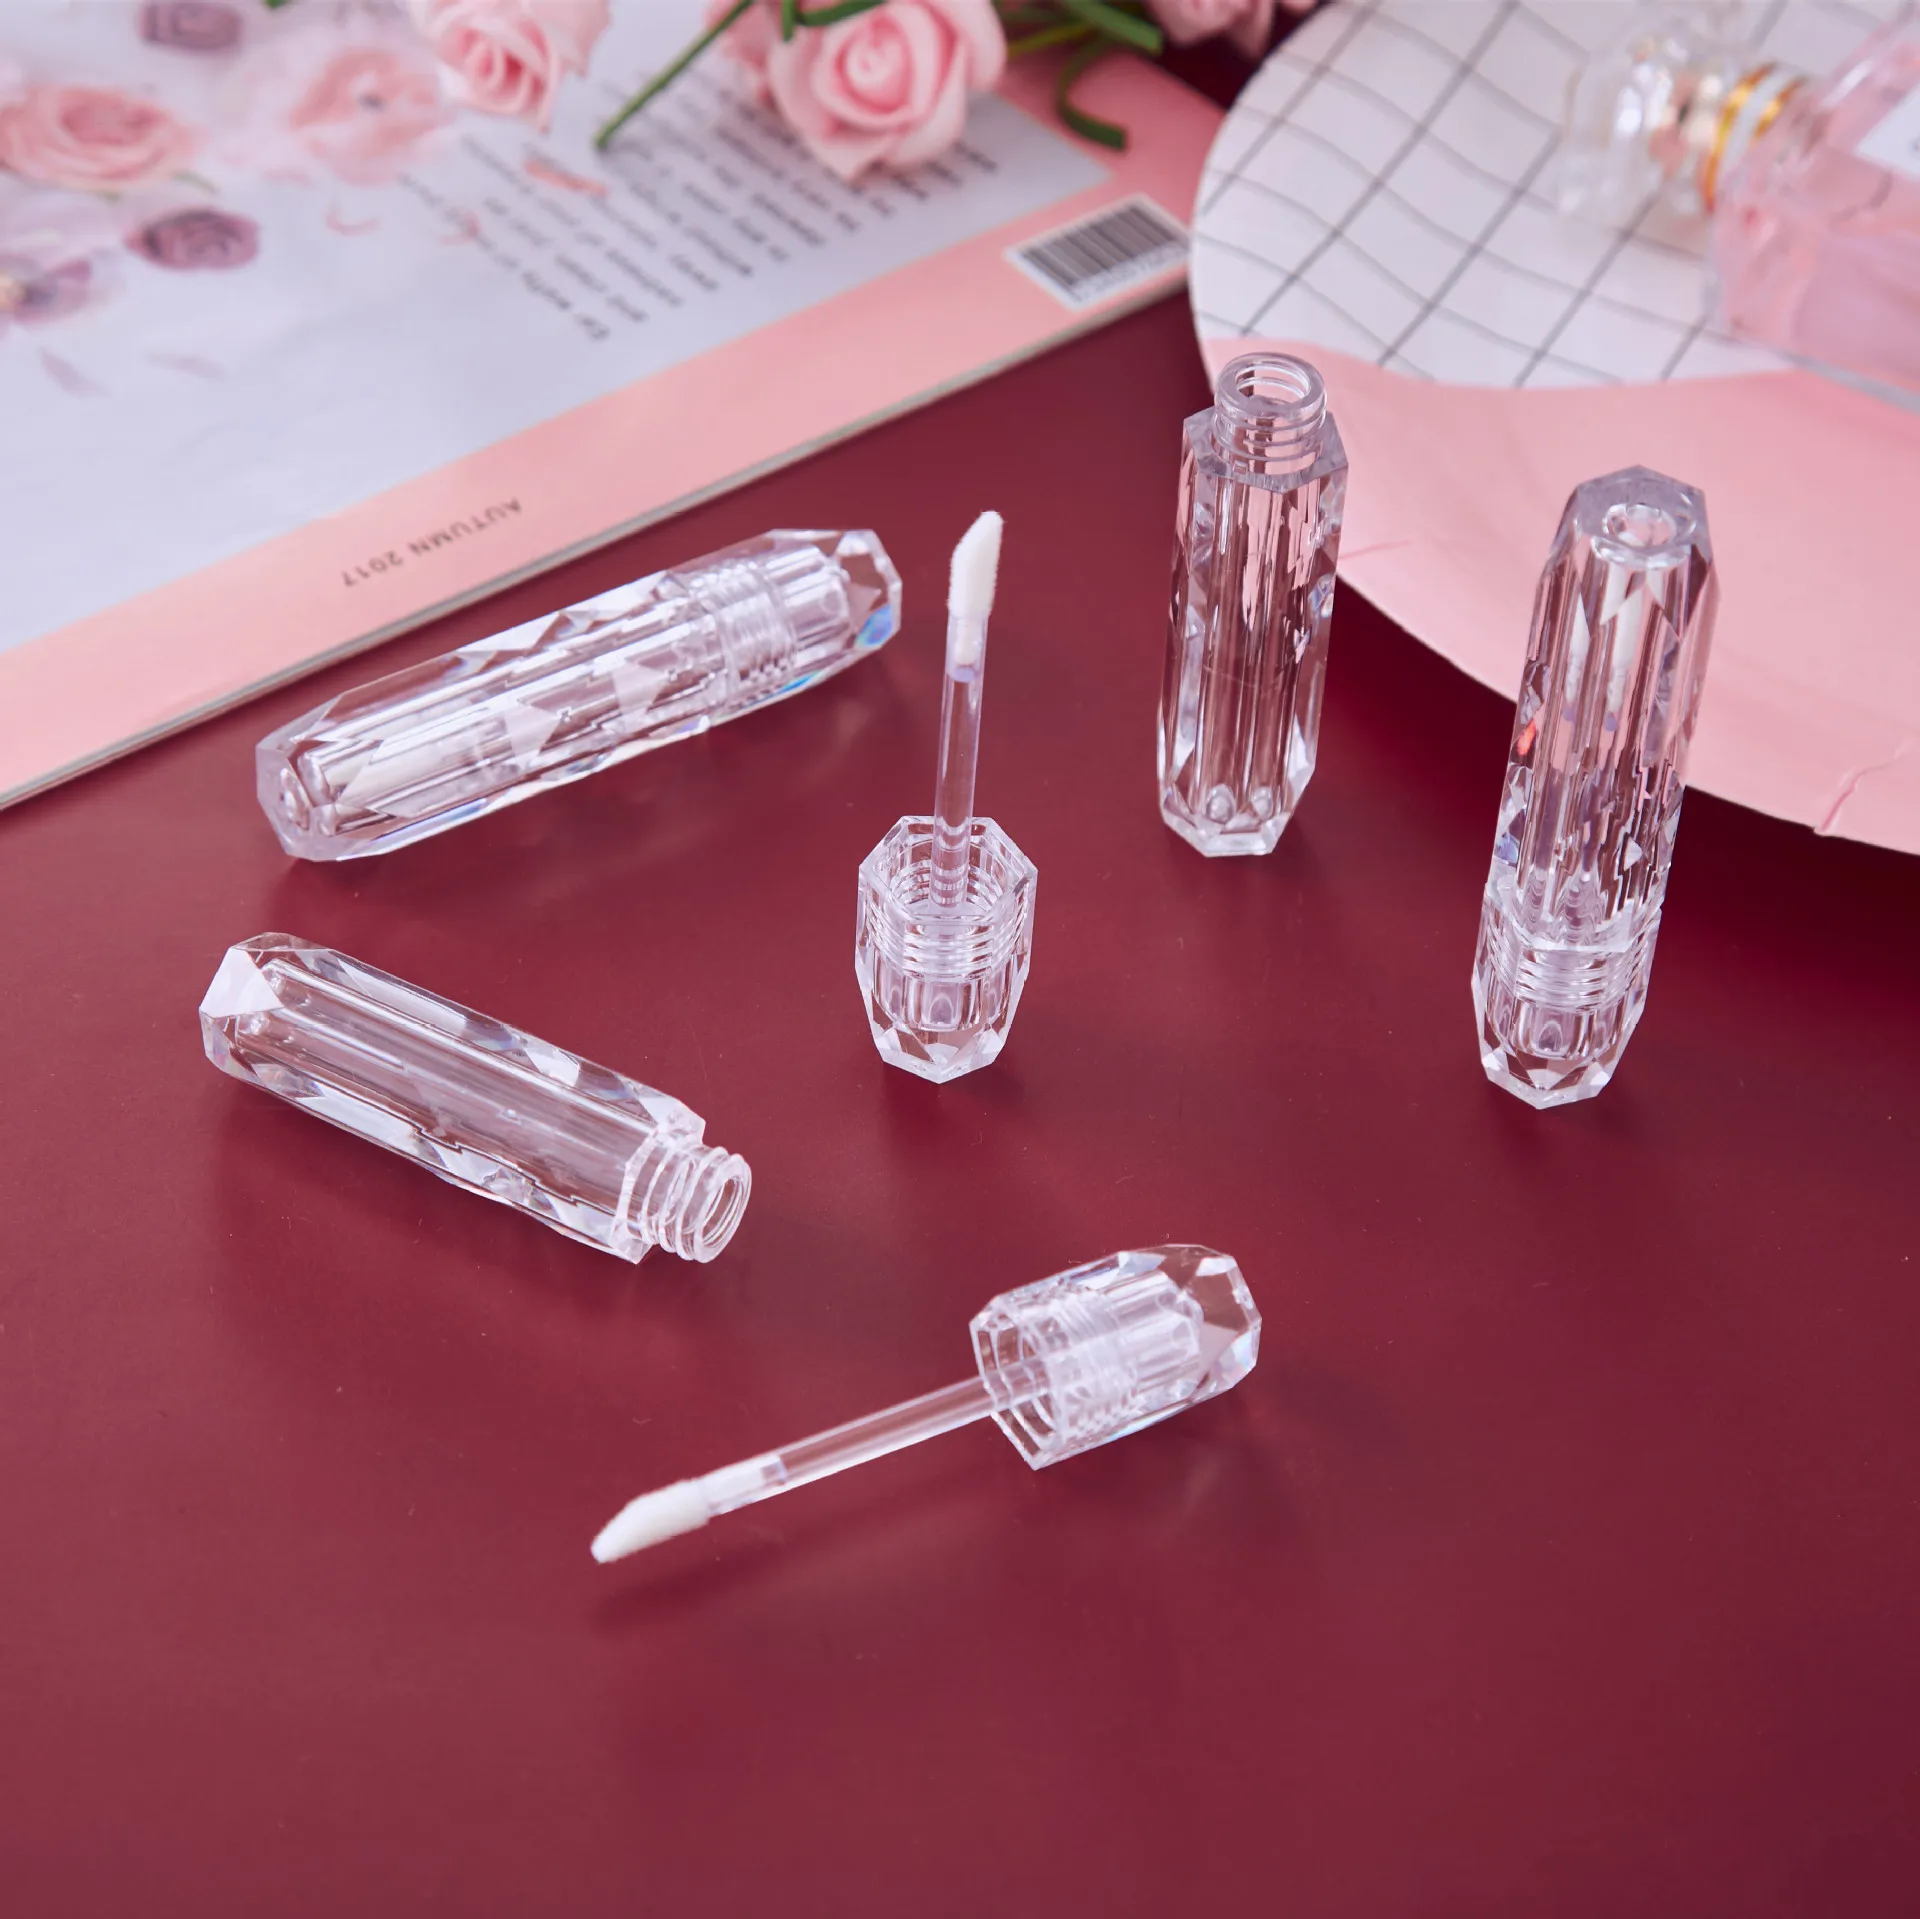 2.5ml Diamond Clear Plastic Lip Gloss Empty Tube Cosmetic LipGloss Container Packaging 50pcs lot 6 5ml lipgloss tube clear big brush cosmetic lip gloss flat packaging container balm soft makeup tool glaze wholesale